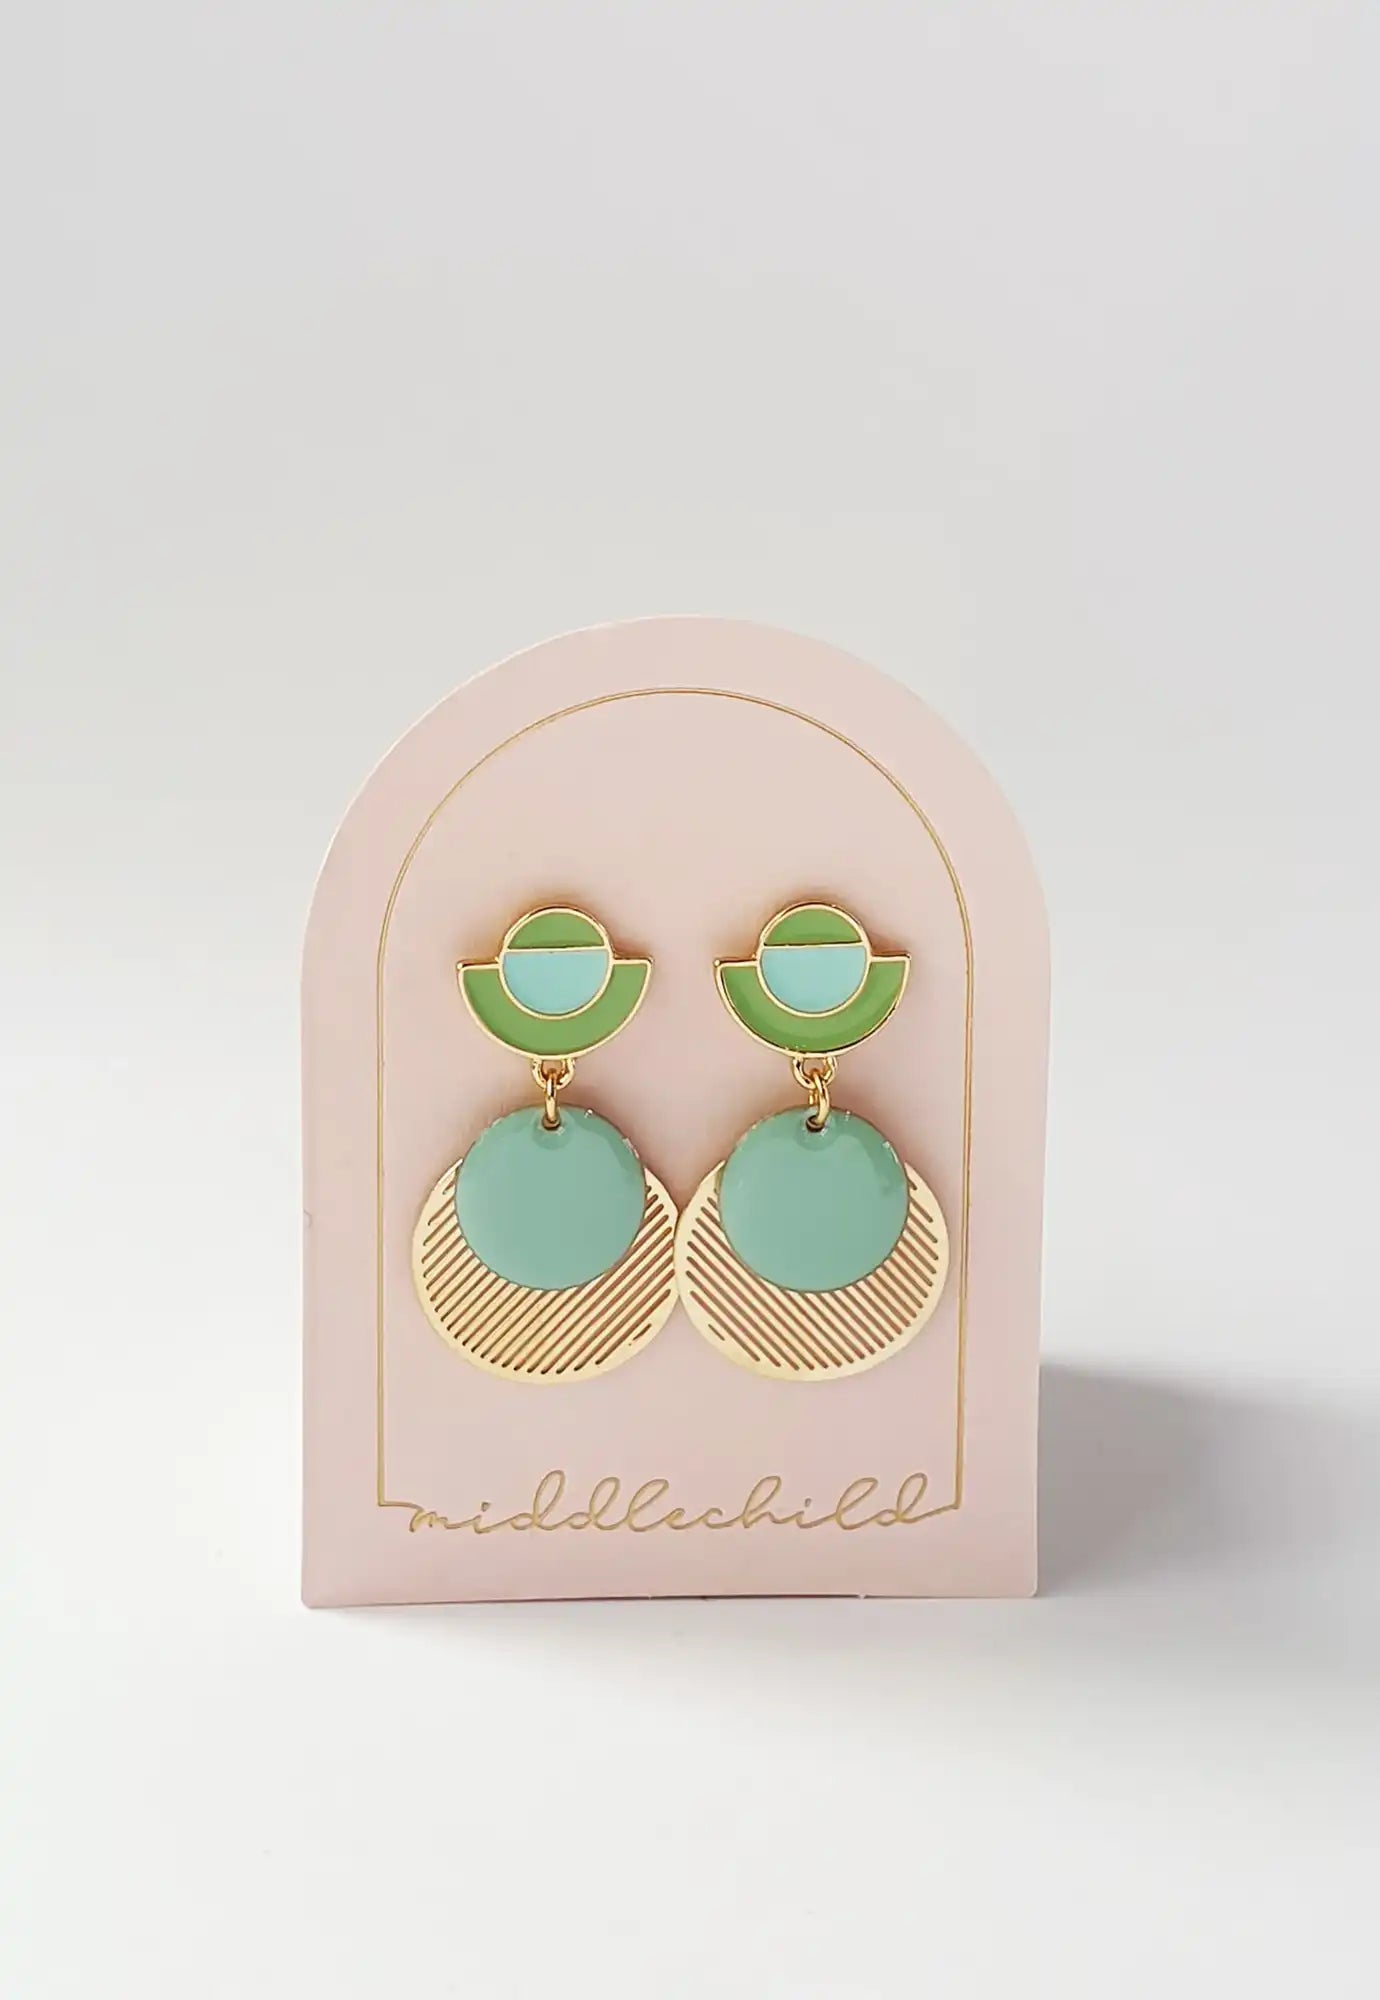 middle child - sixpence earrings